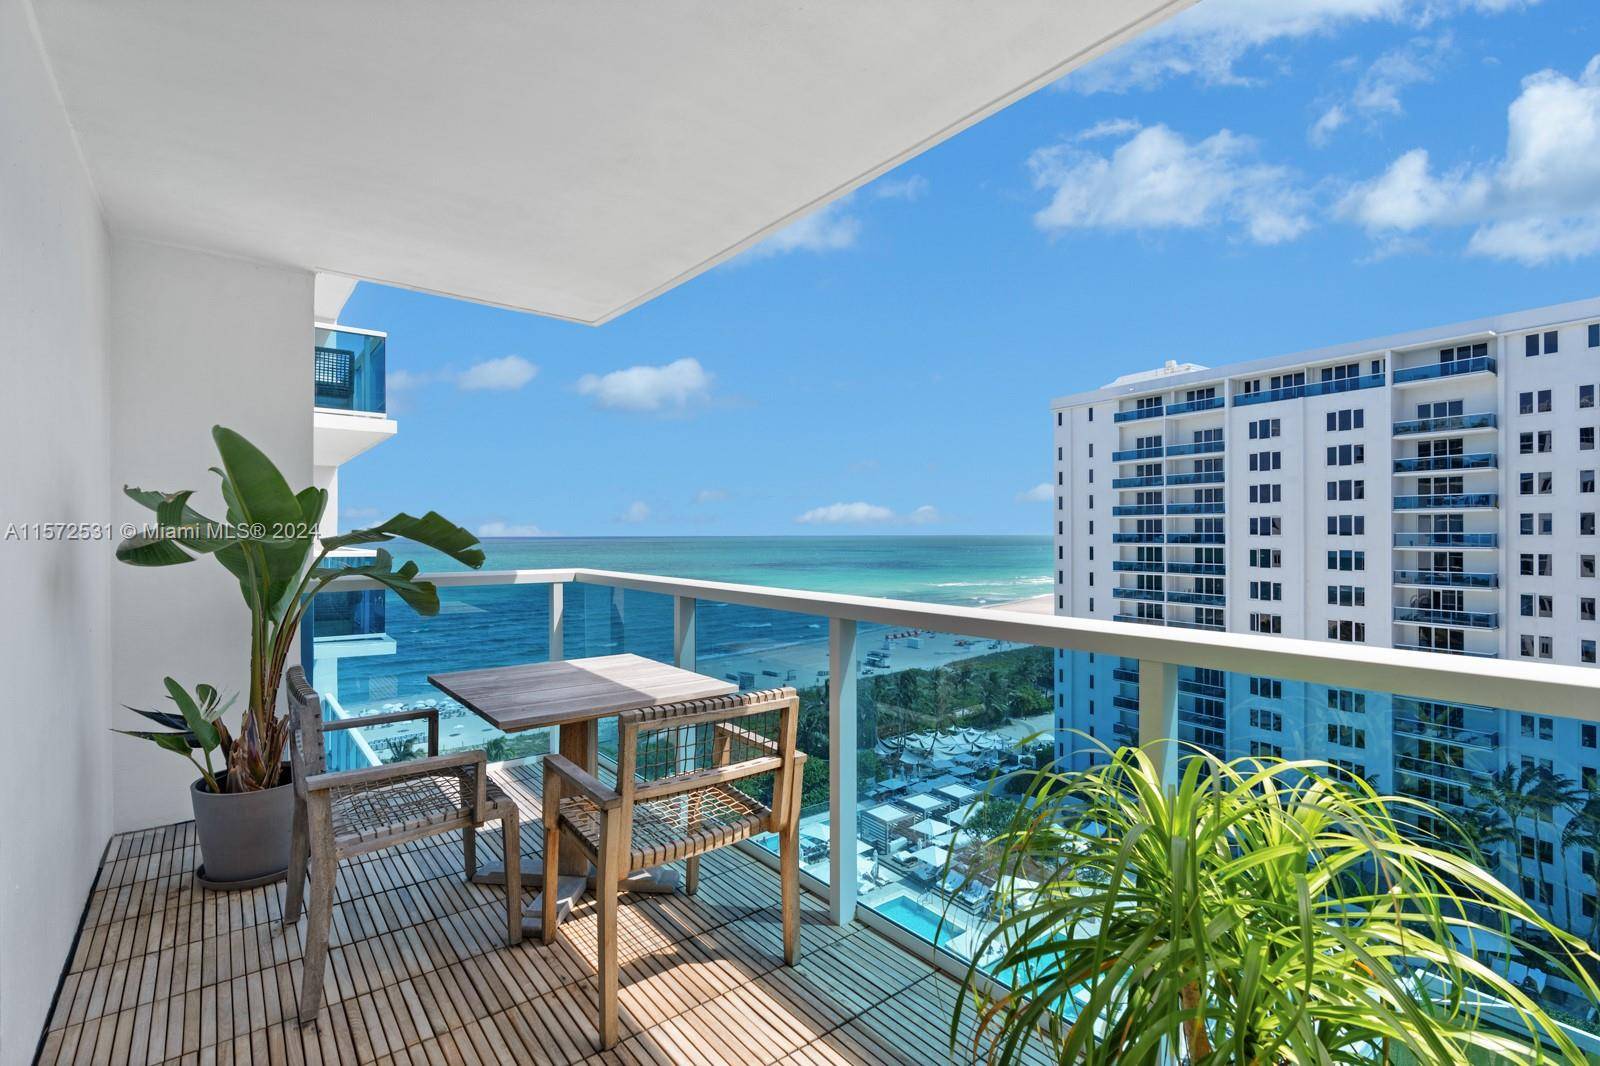 Incredible ocean views from this upgraded unit at 1 Hotel Homes in Miami Beach.